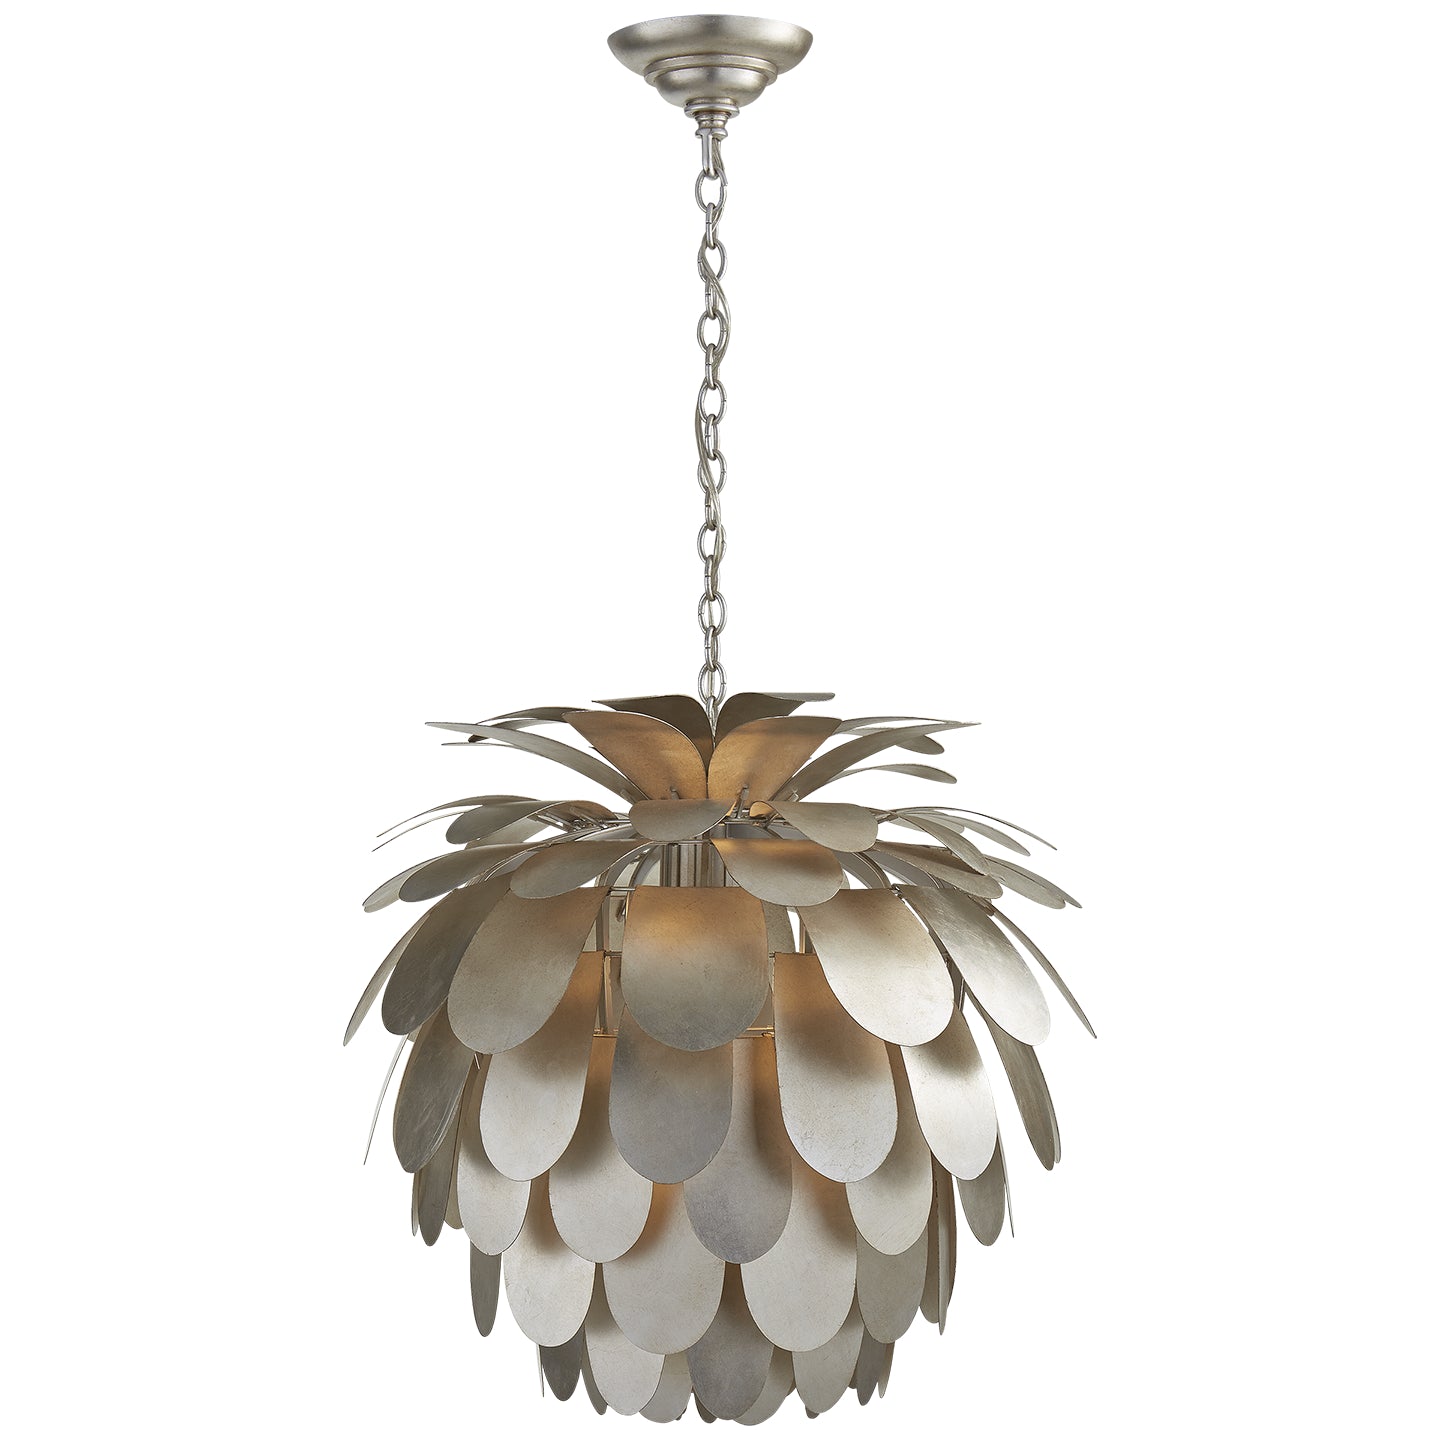 Load image into Gallery viewer, Visual Comfort Signature - CHC 5165BSL - One Light Chandelier - Cynara - Burnished Silver Leaf
